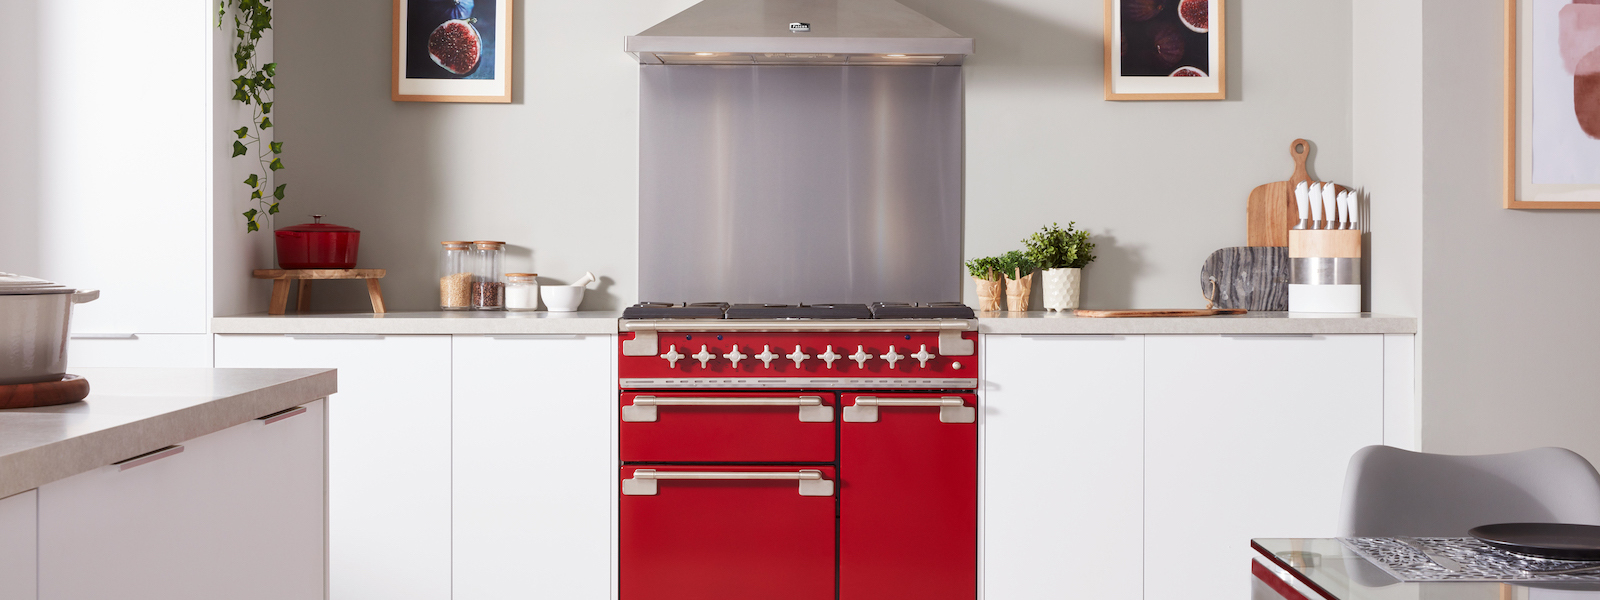 30% Off Falcon Cooker Discontinued* Colours, While Stocks Last at Hart & Co